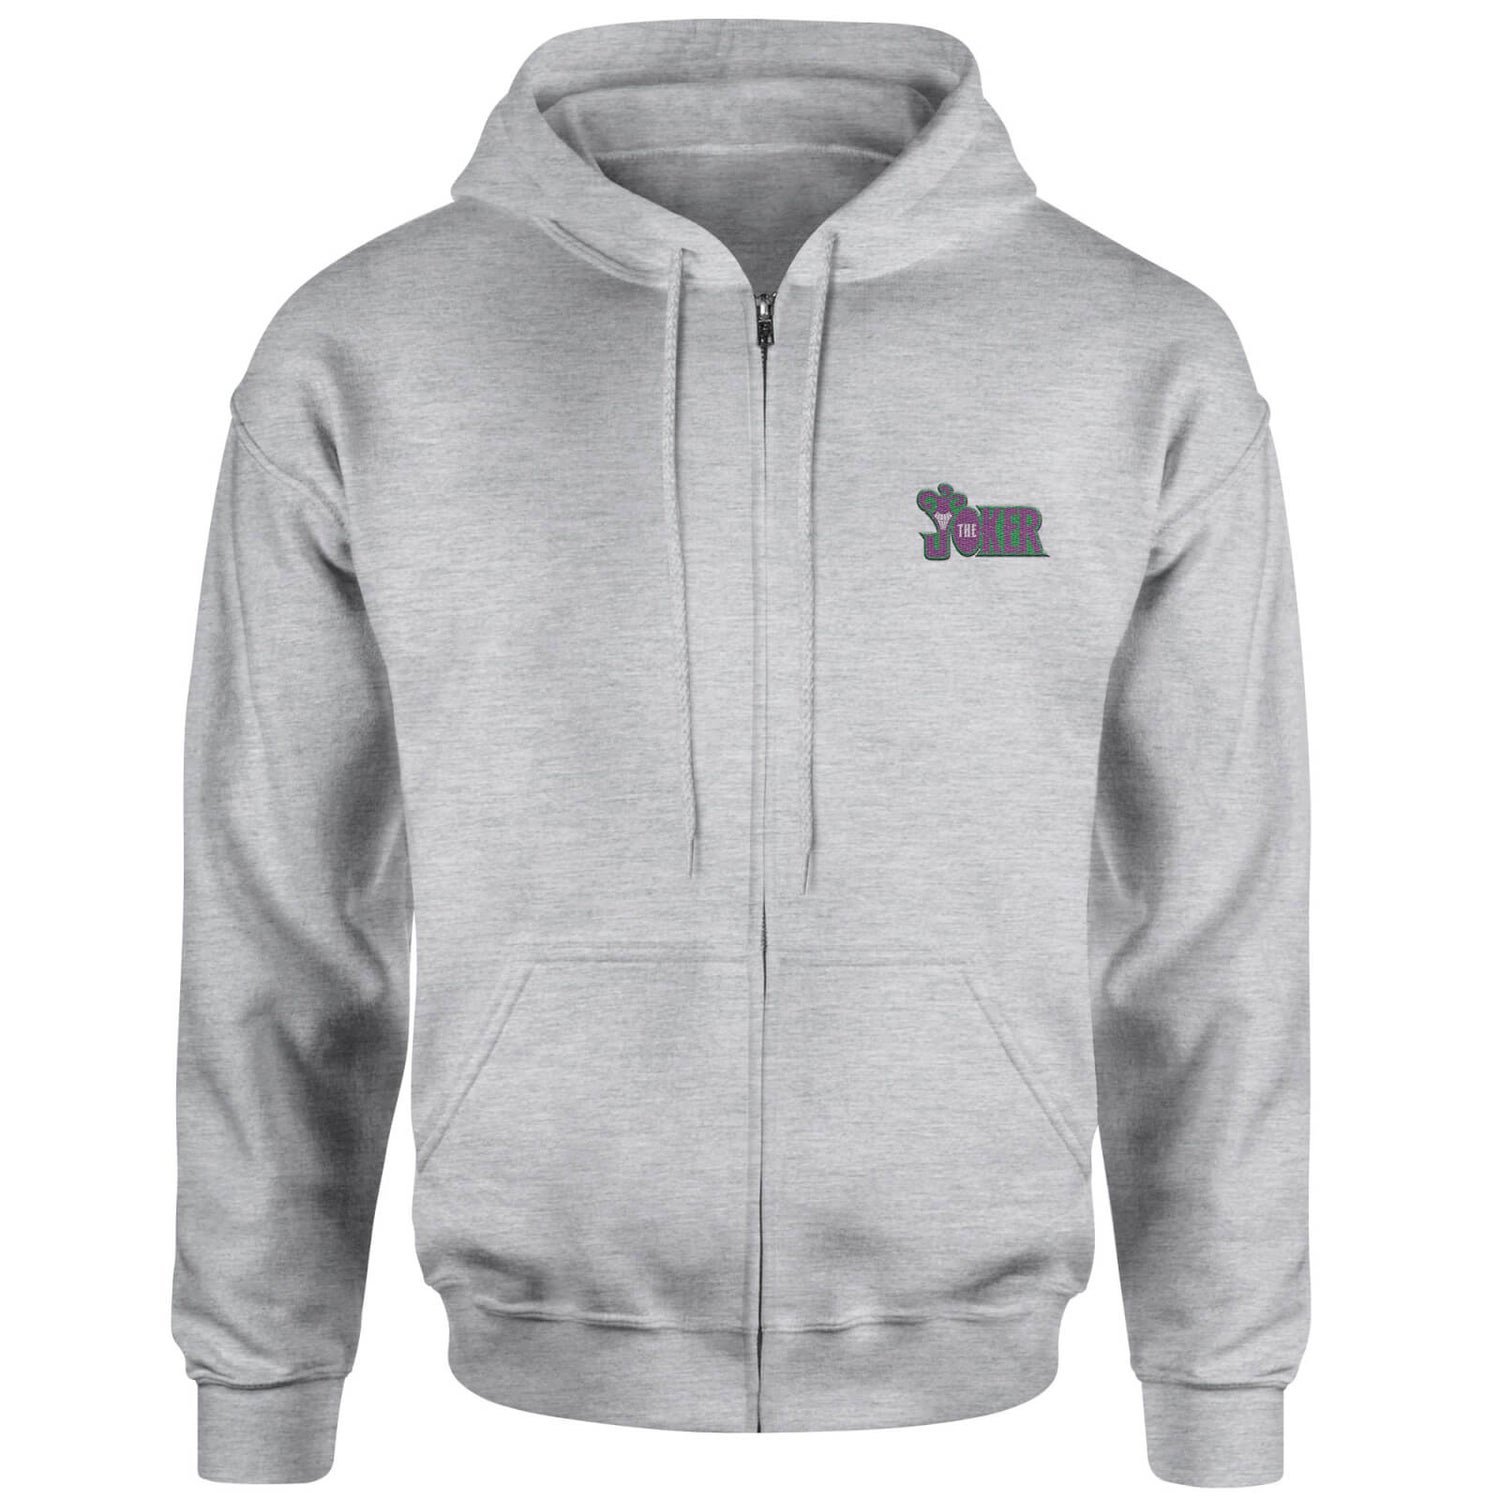 The Joker Embroidered Unisex Zipped Hoodie - Grey